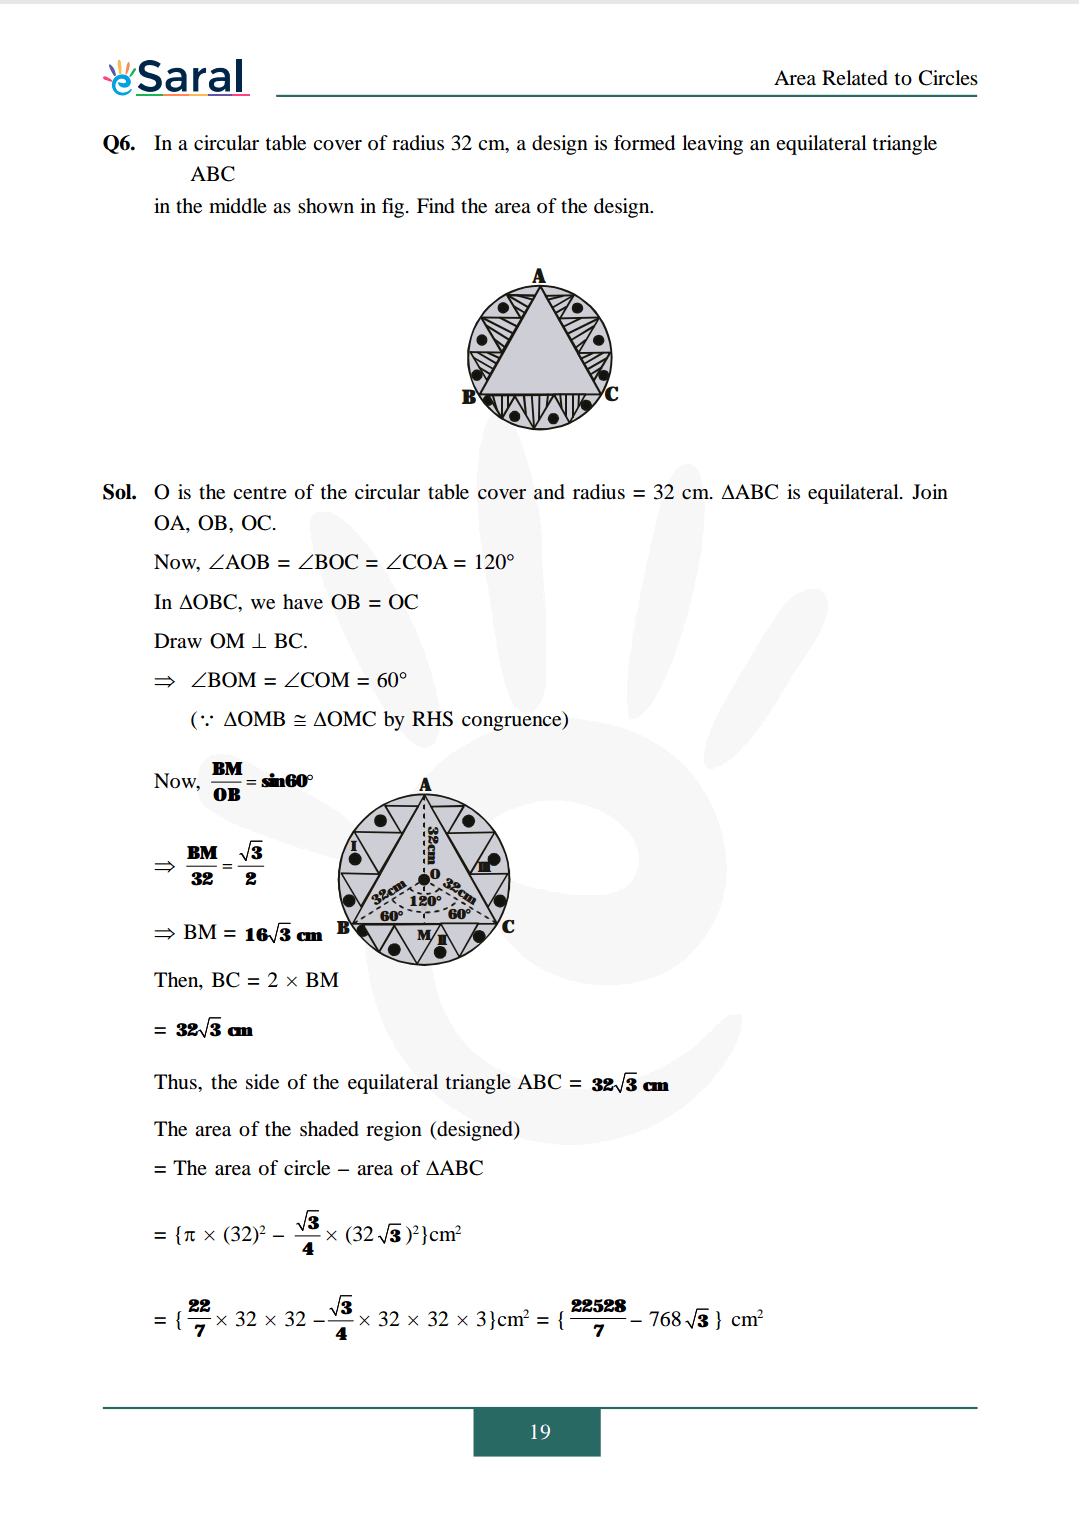 Chapter 12 exercise 12.3 solutions Image 5